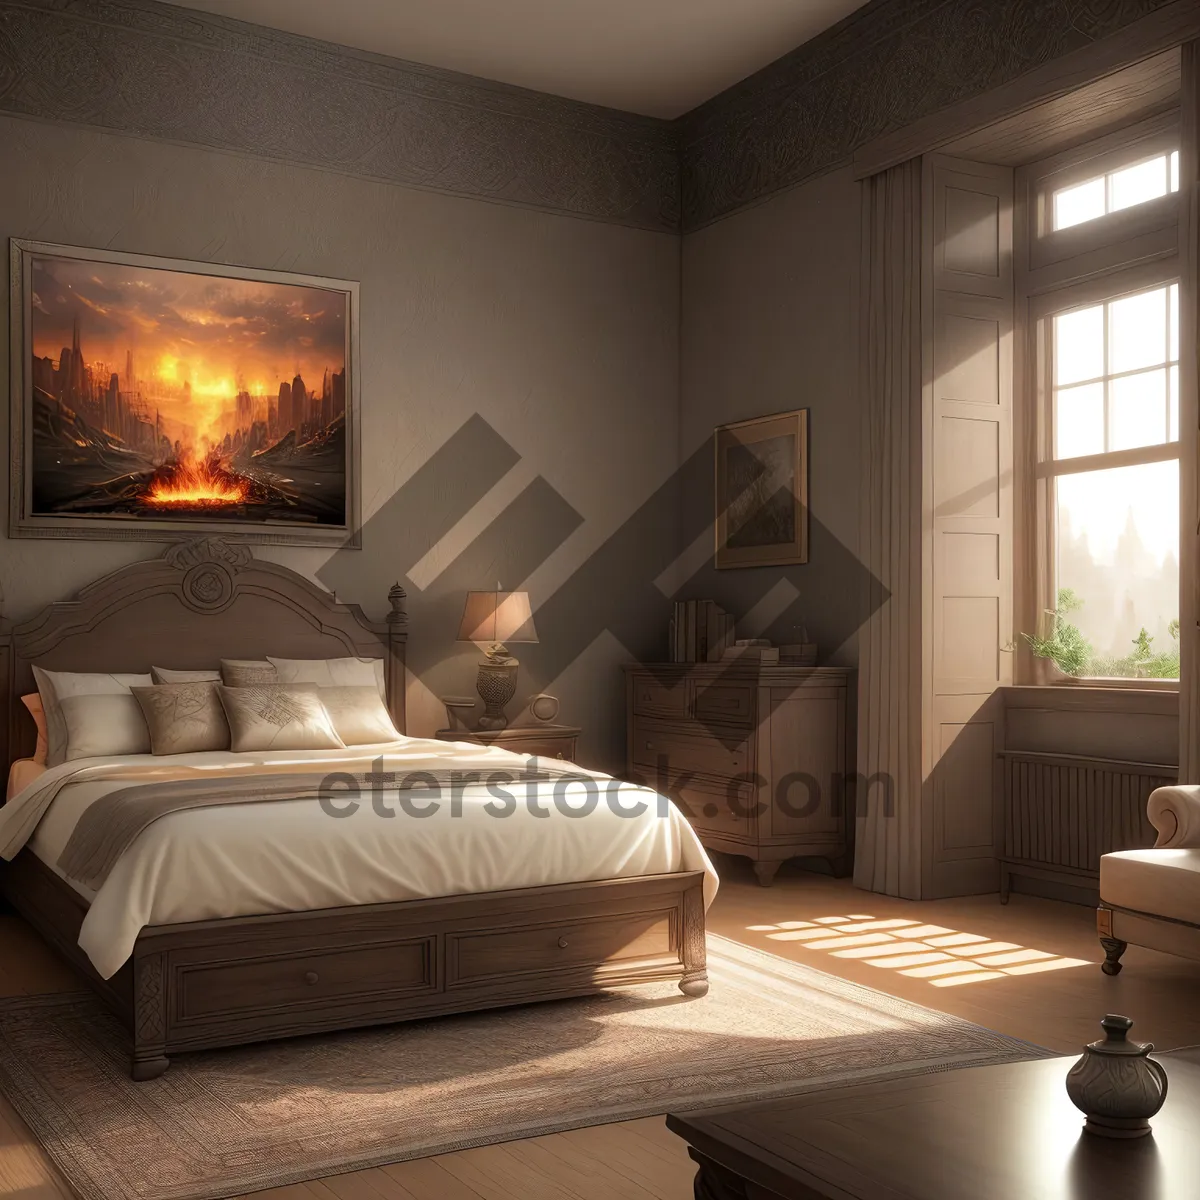 Picture of Modern Luxury Bedroom with Cozy Furniture and Fireplace